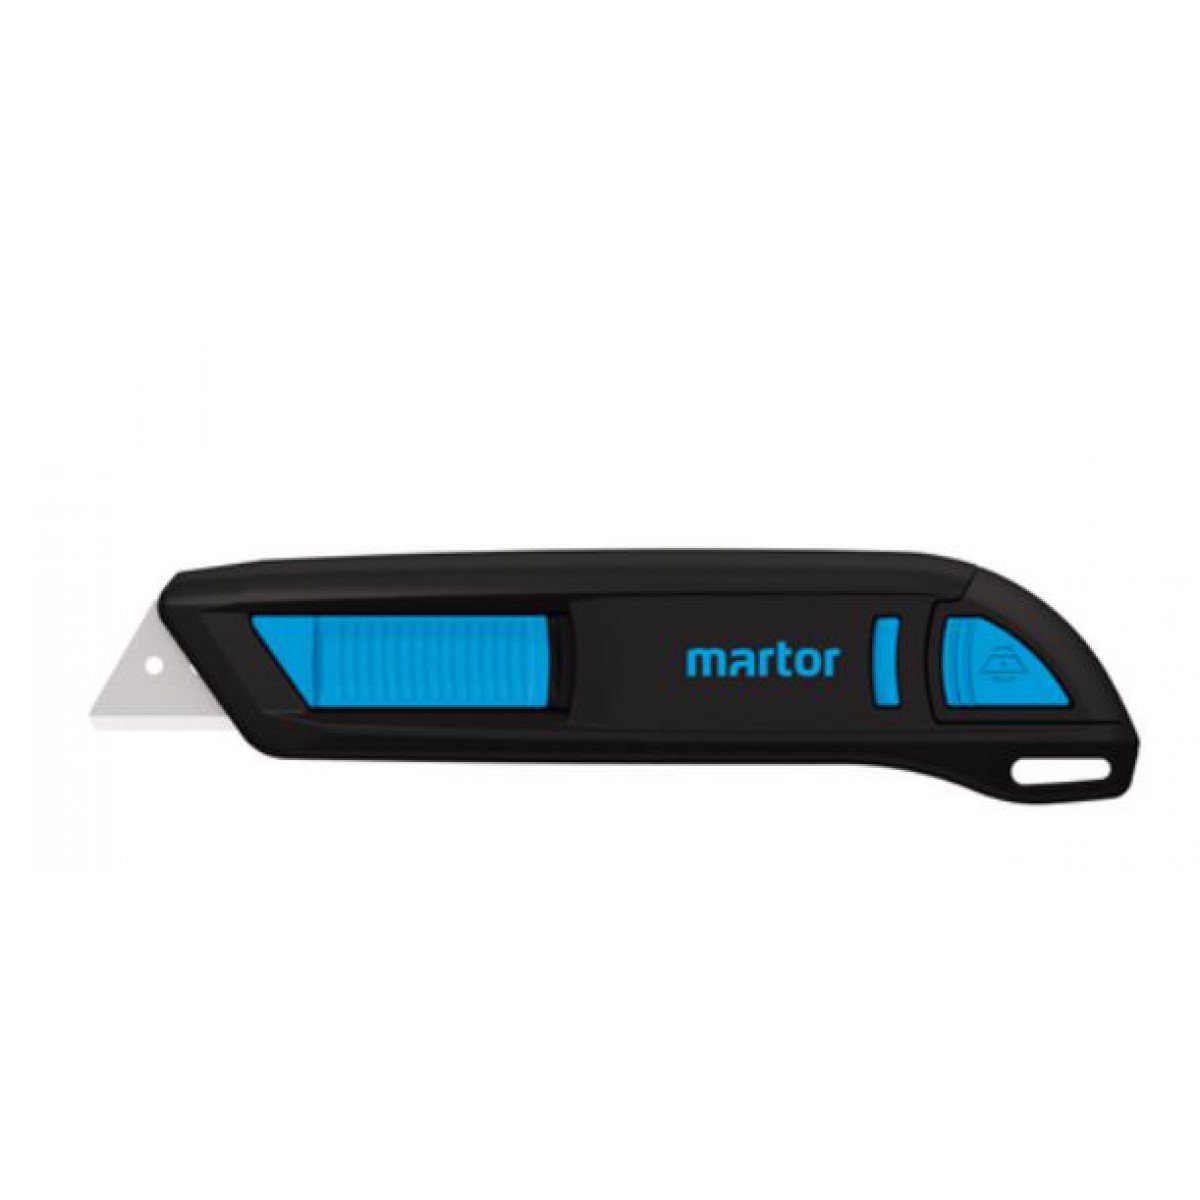 Martor Secunorm 300 Safety Knife Blue One Size